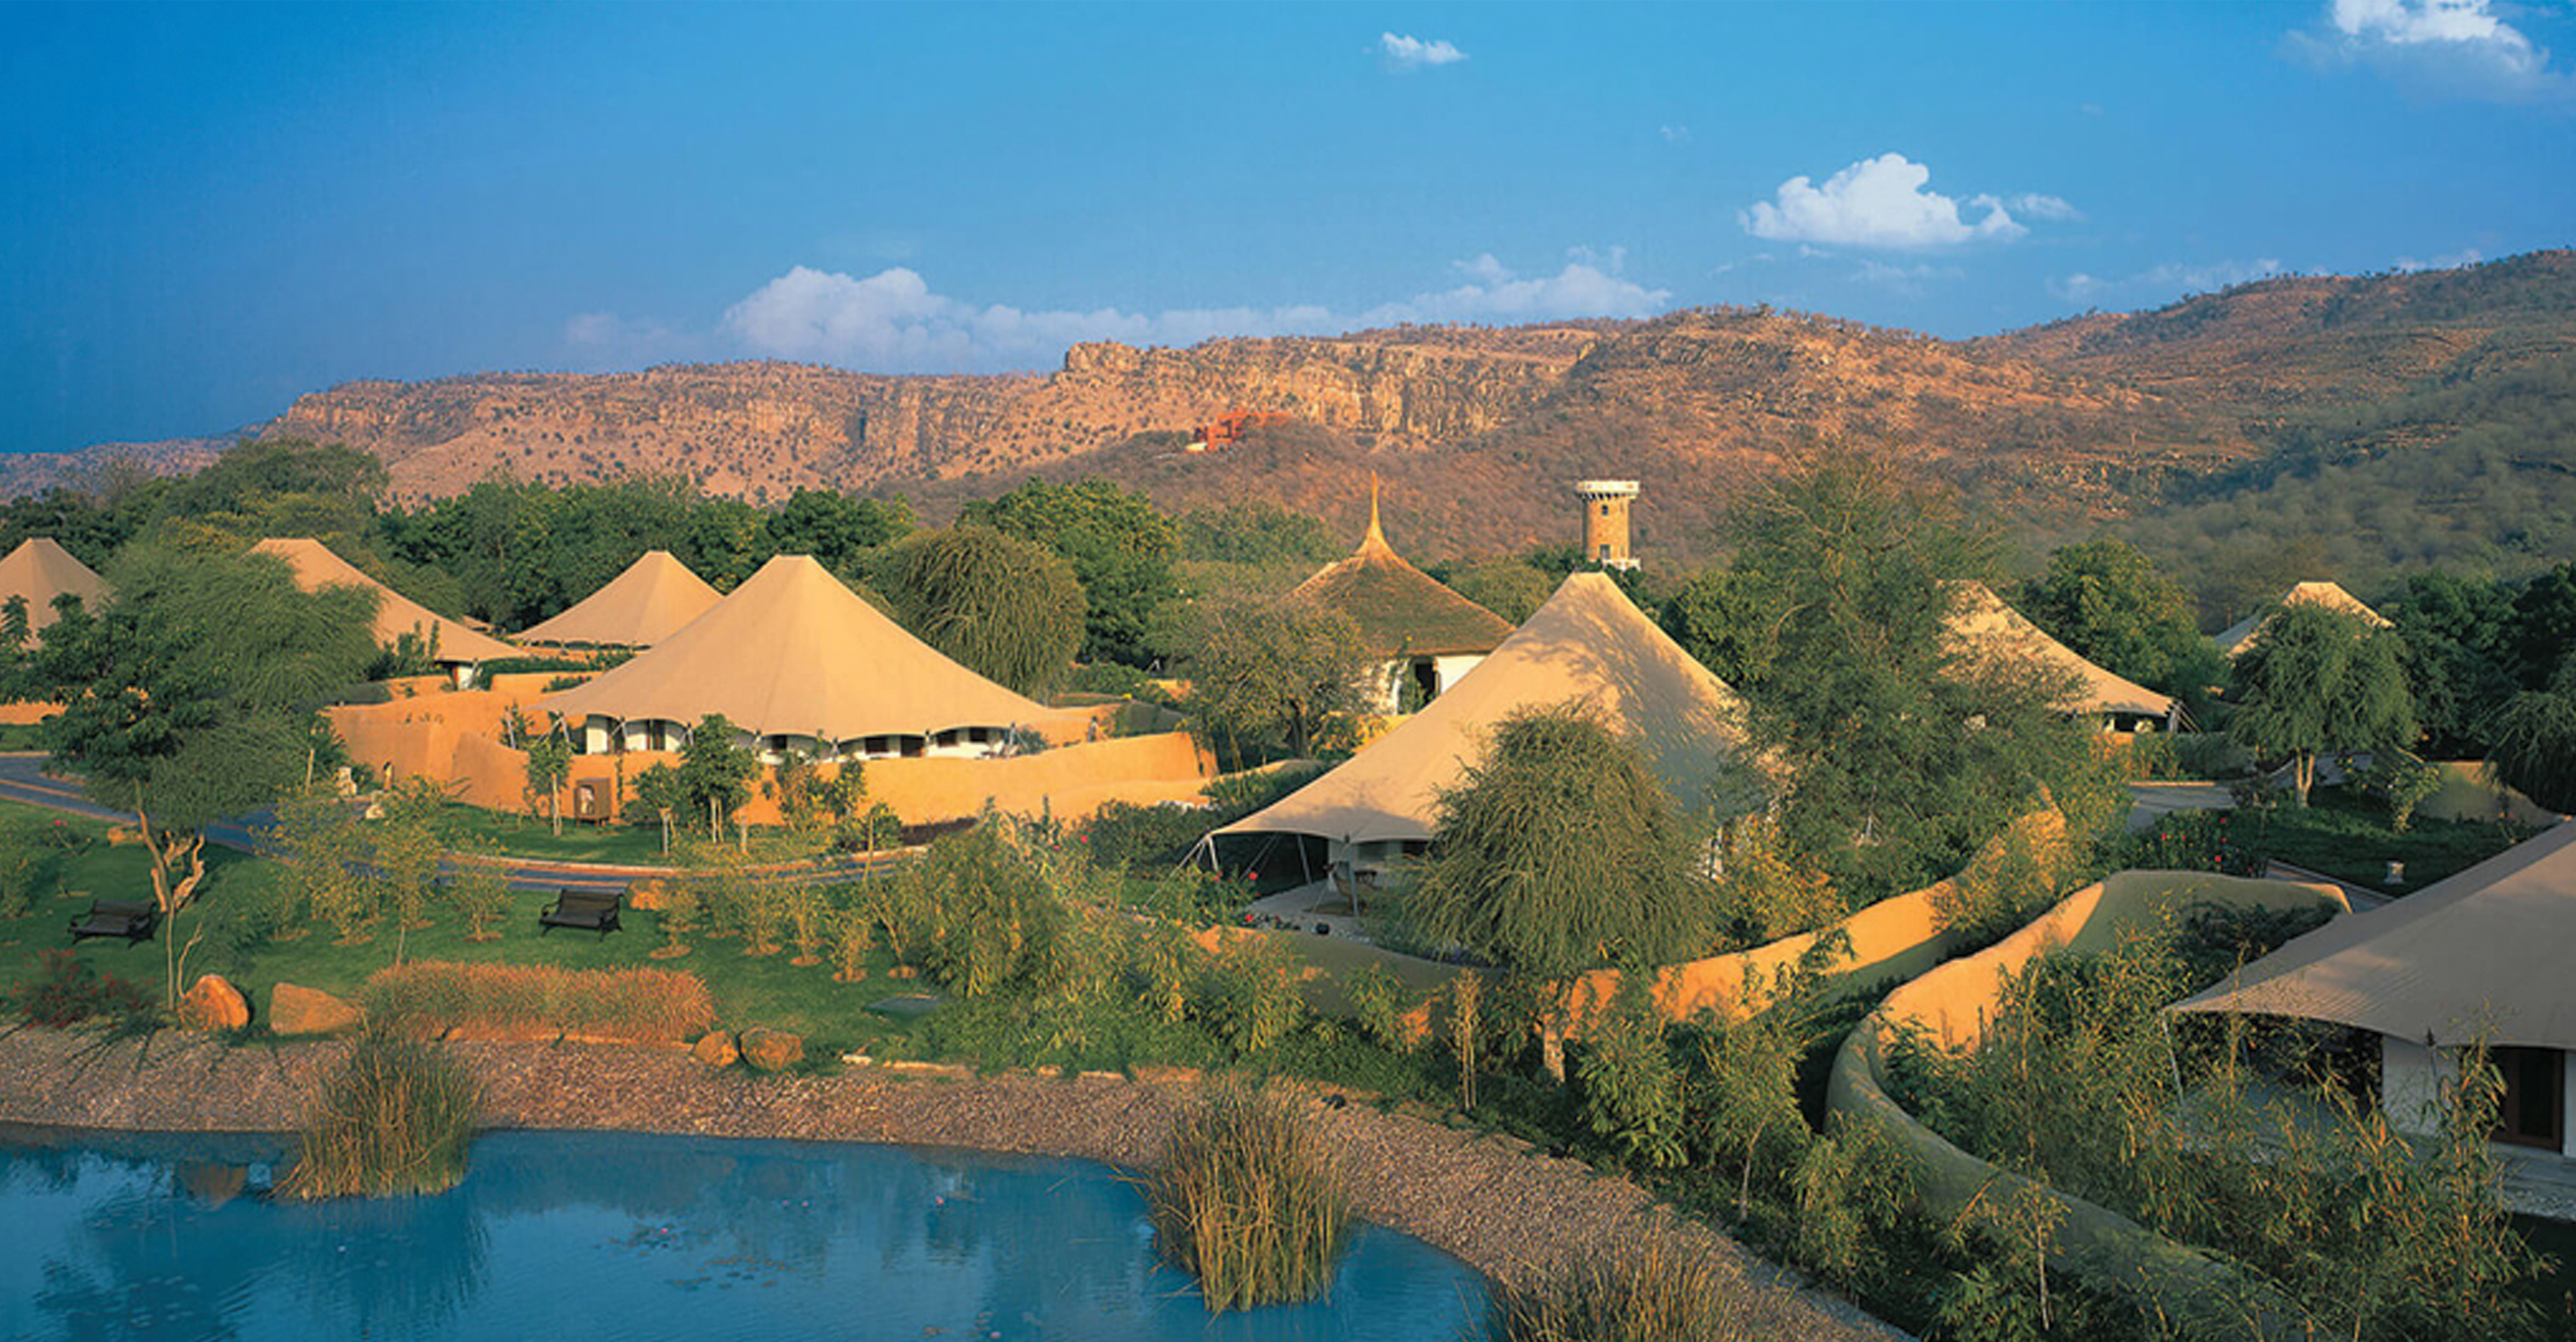 Aerial view of Oberoi Vanyavilas Wildlife Resort on the outskirts of Ranthambore National Park, India